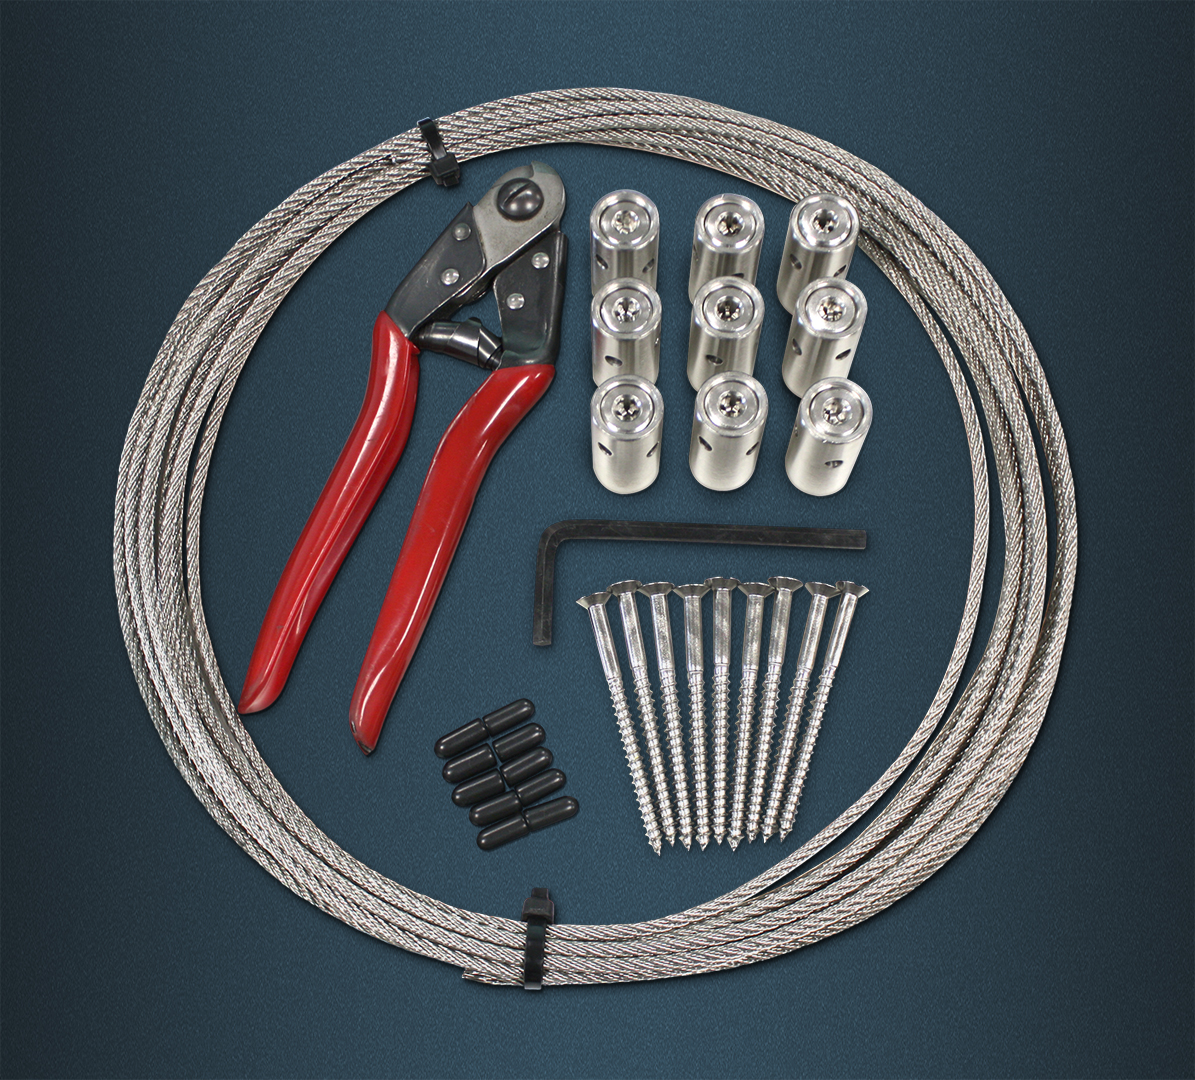 Wire Rope Green Wall Kit Contence - Length of Wire Rope, Hubs, Wood Screws, rubber end caps, hex key, wire rope cutters